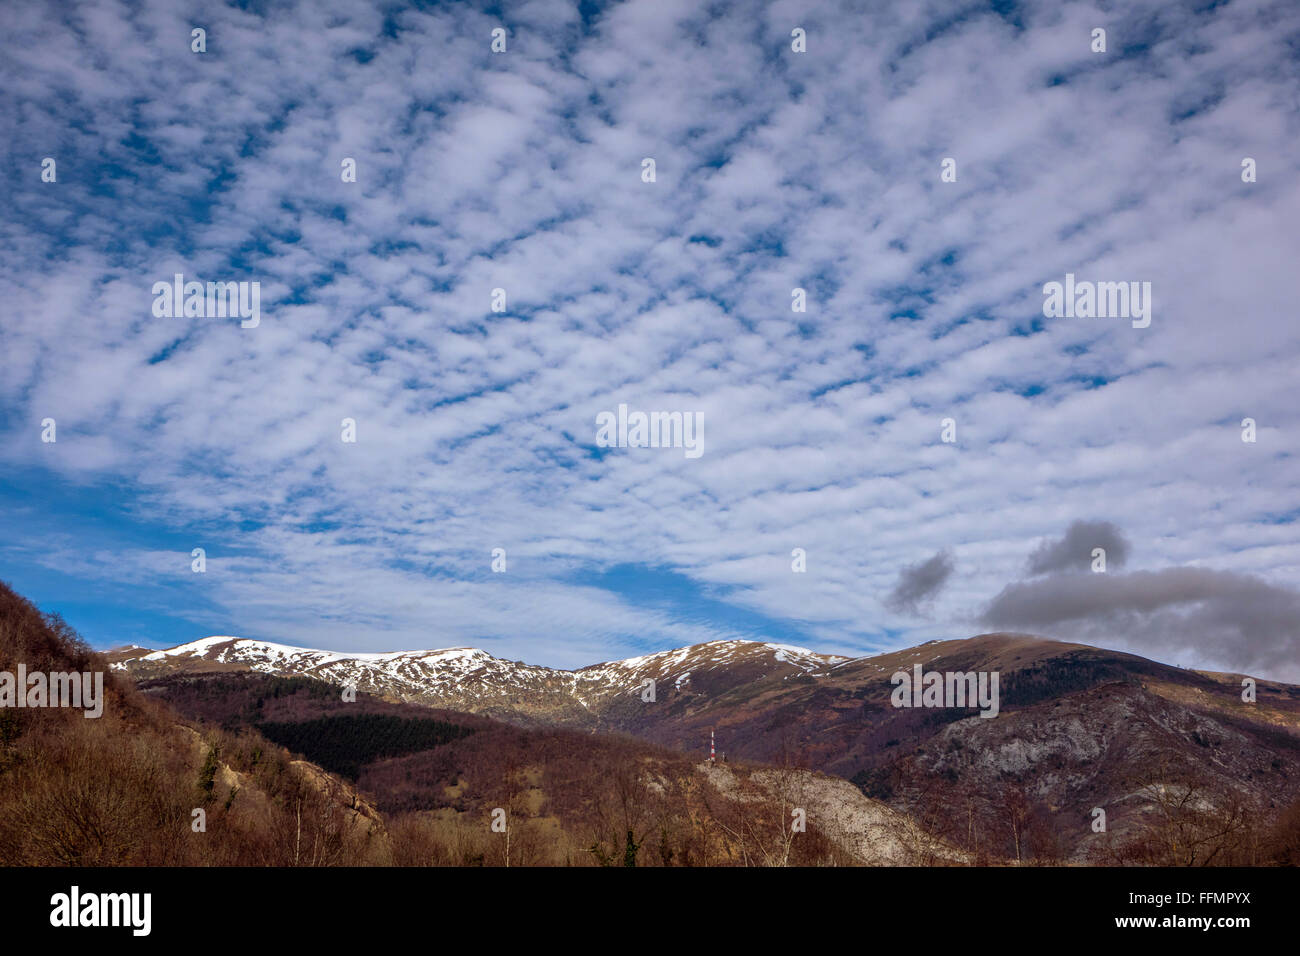 Mackeral sky clouds above French Pyrenees, good weather Stock Photo